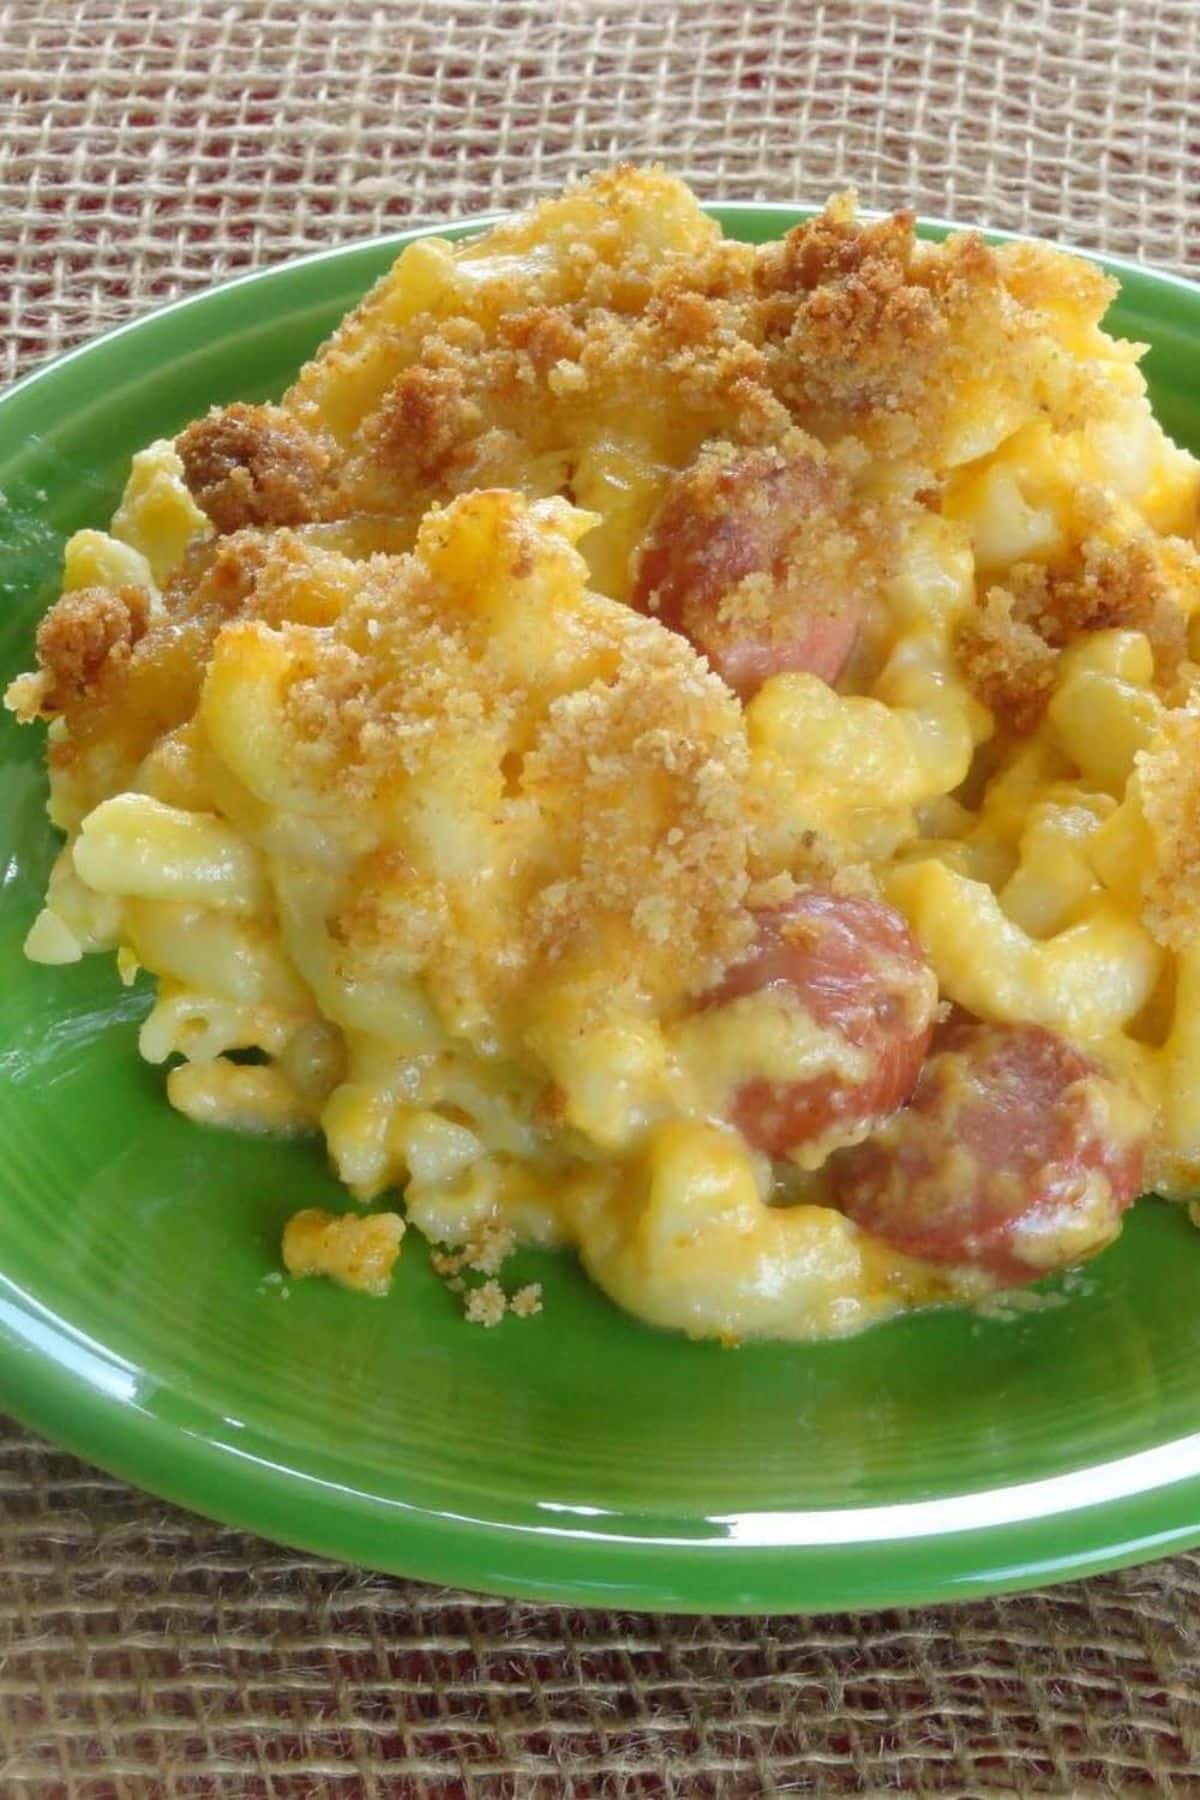 Delicious hot dog mac n’ cheese on a green plate.